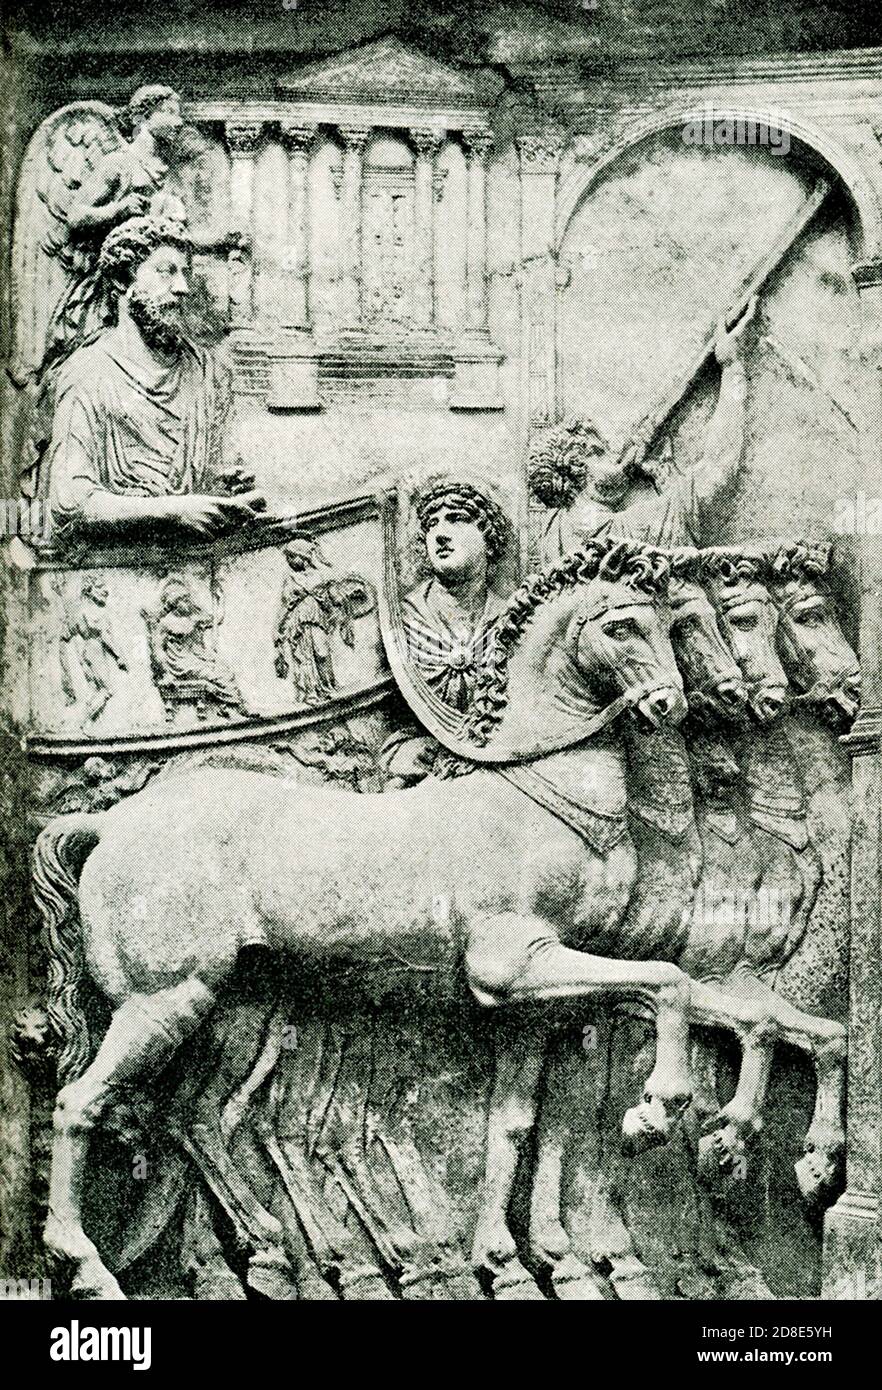 This 1876 photo shows a relief of Marcus Aurelius passing along the Via Sacra with Temple of Julius Caesar and Arch of Fabius in the background. The relief is housed in the Conservatori Palace. Marcus Aurelius Antoninus was Roman emperor from 161 to 180 and a Stoic philosopher. He was the last of the rulers known as the Five Good Emperors, and the last emperor of the Pax Romana, an age of relative peace and stability for the Roman Empire. Stock Photo